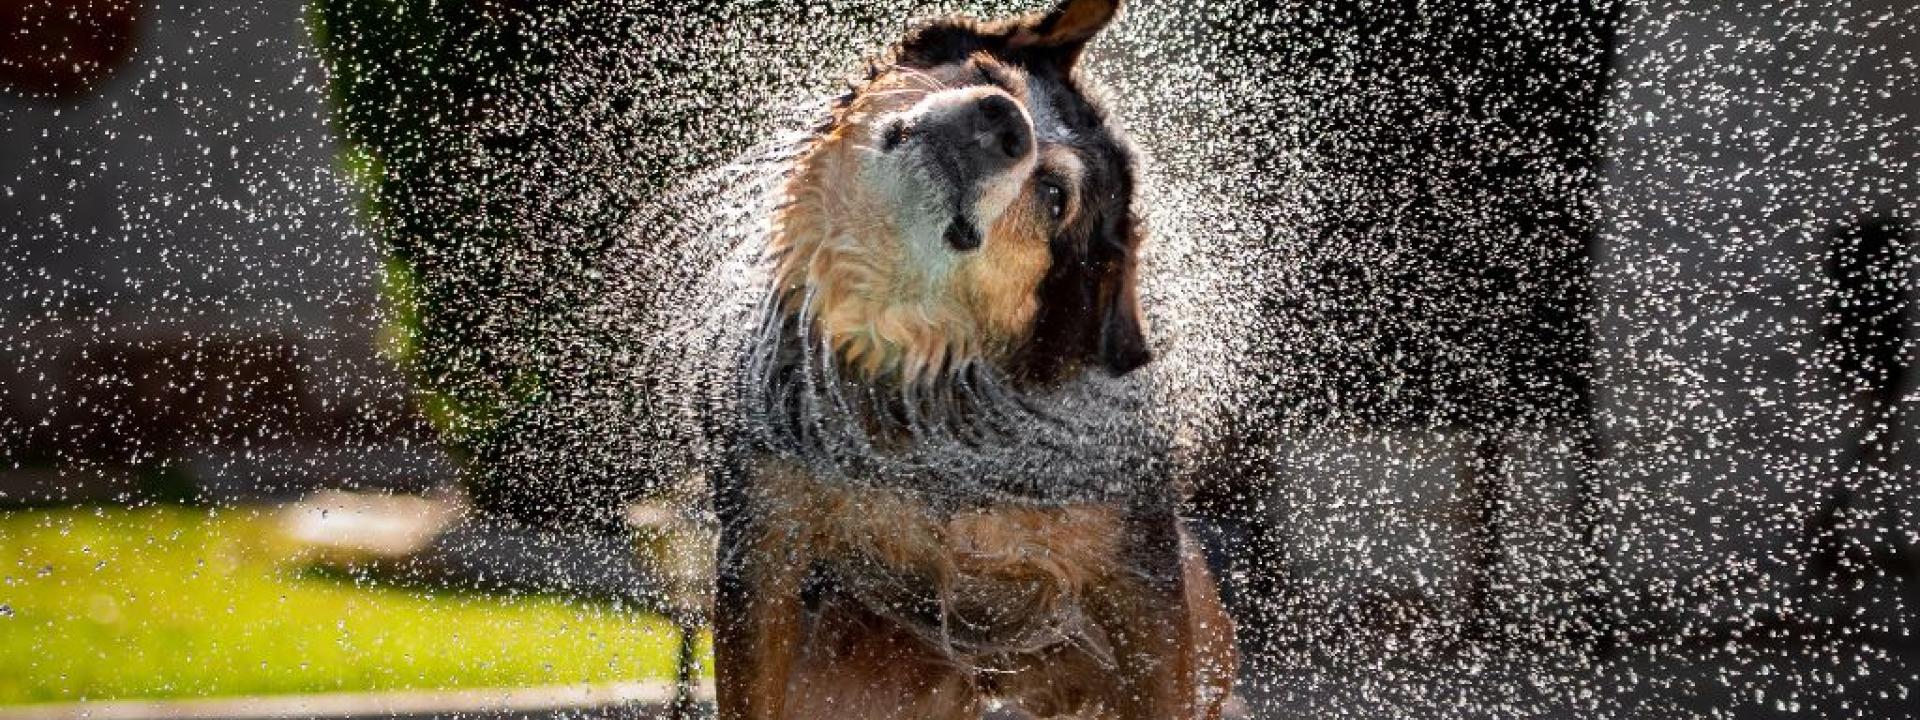 A wet dog shaking water out of its ears.